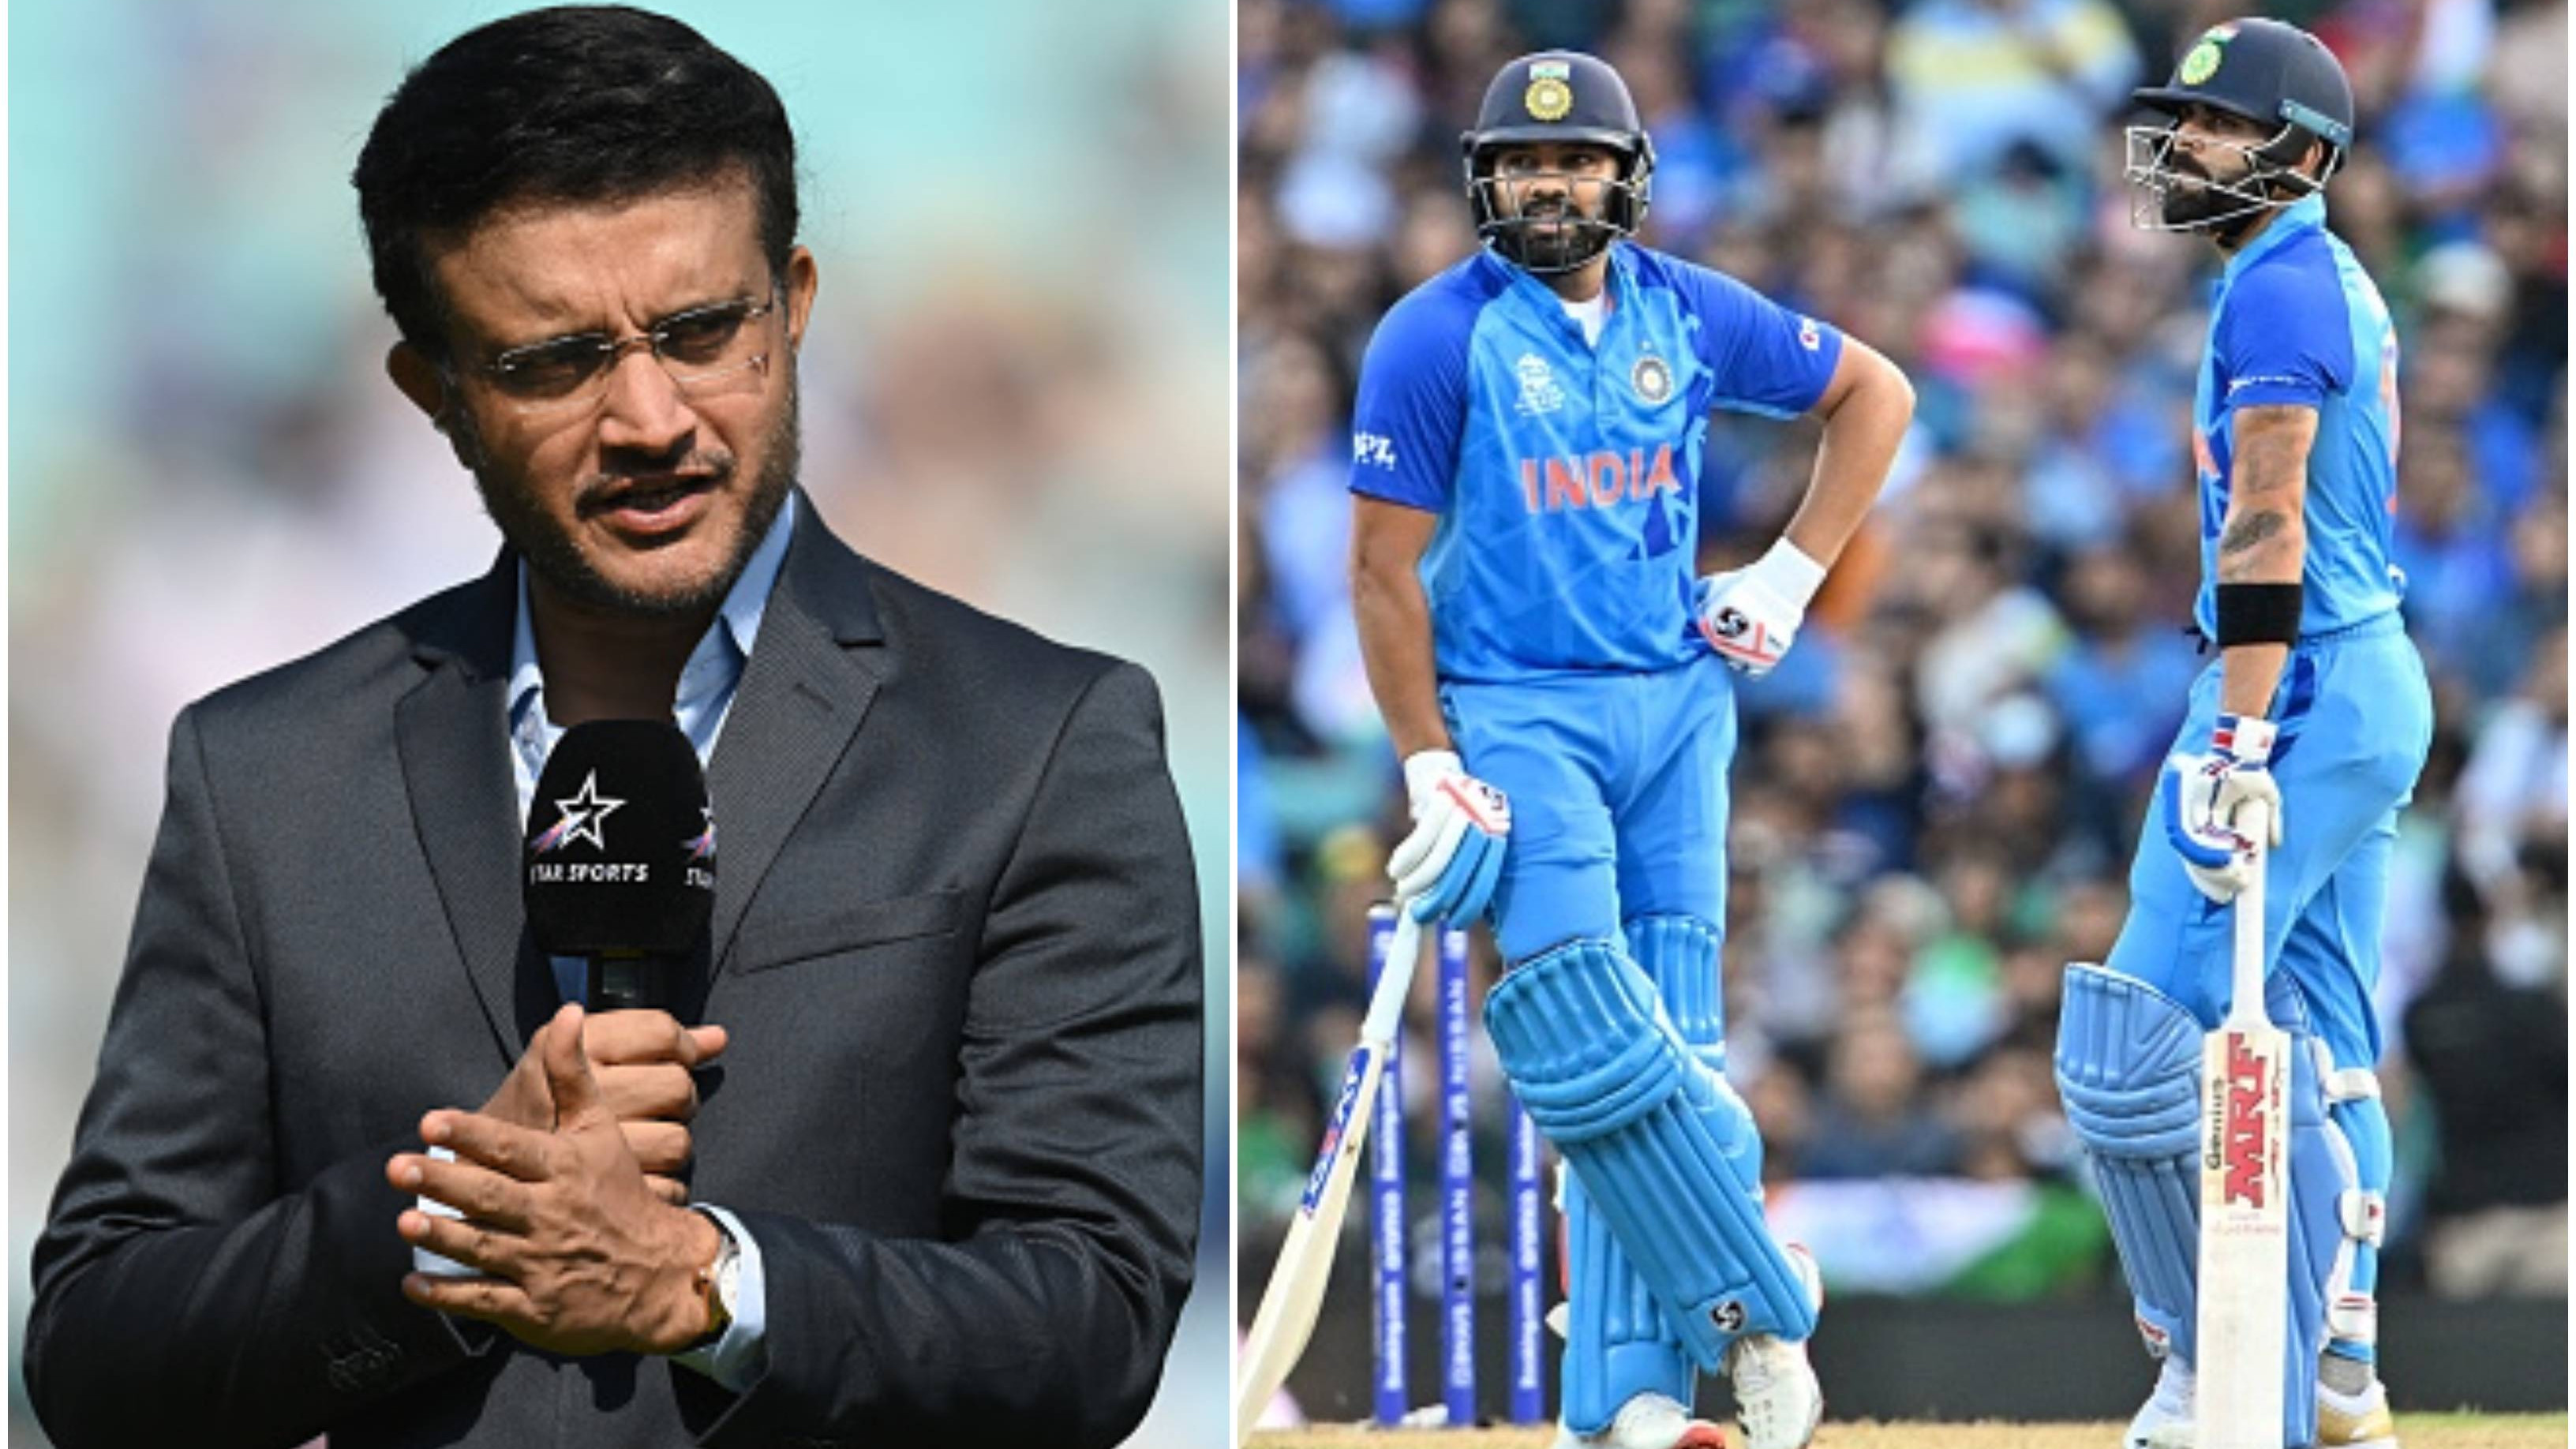 “Both have place in T20 cricket,” Sourav Ganguly questions Kohli and Rohit’s snub from West Indies T20I series